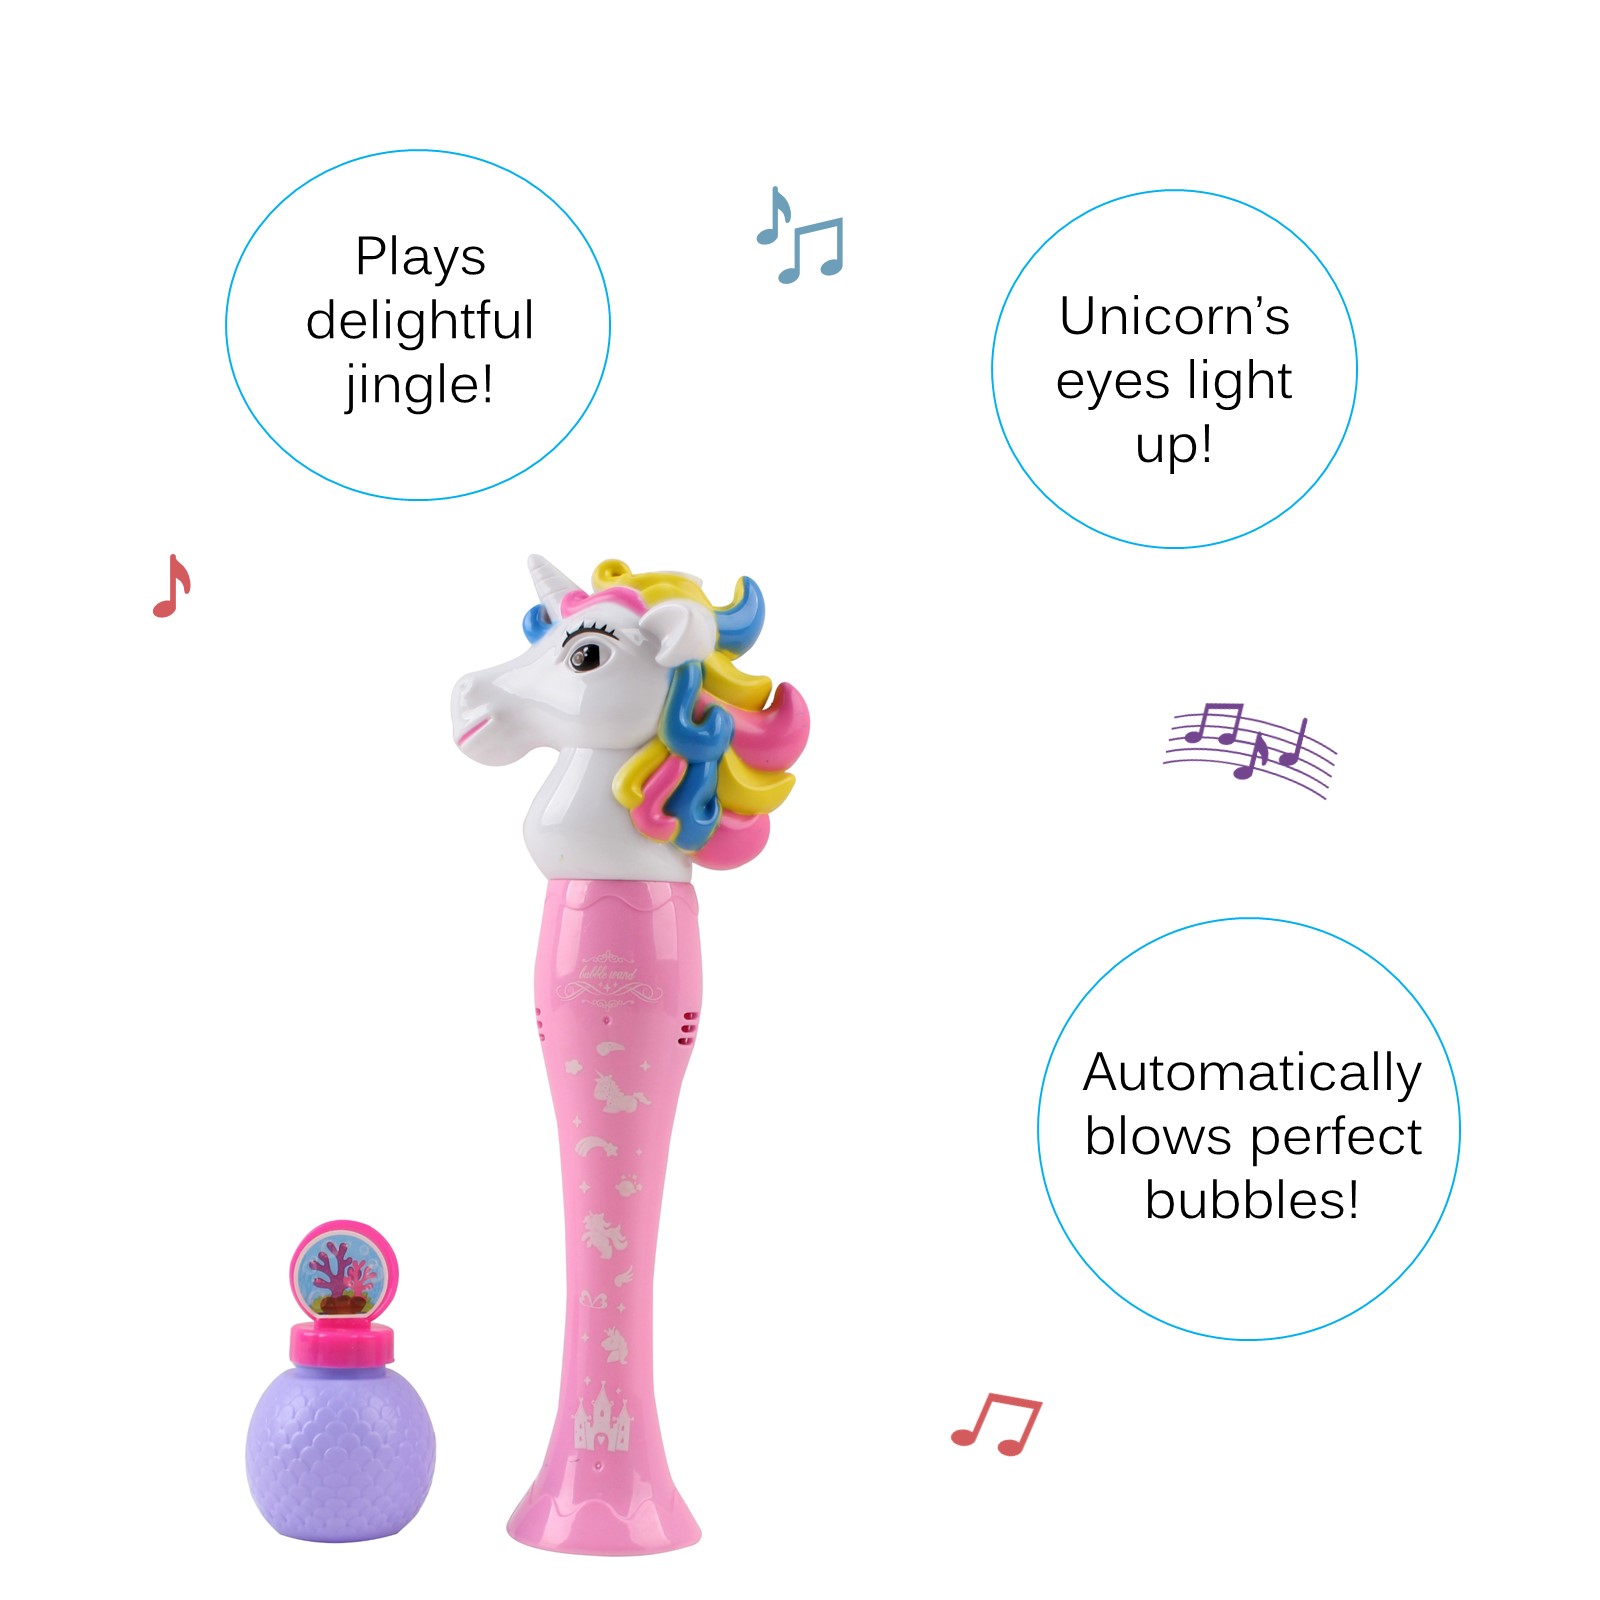 Unicorn Bubble Blower Machine Wand Automatically Shoots Over 500 Bubbles Per Minute With Light And Music Animal Design Includes 2 Fluid Solutions Simple And Easy to Use Gun Toy For Boys Girls Toddlers Battery Operated TC-81